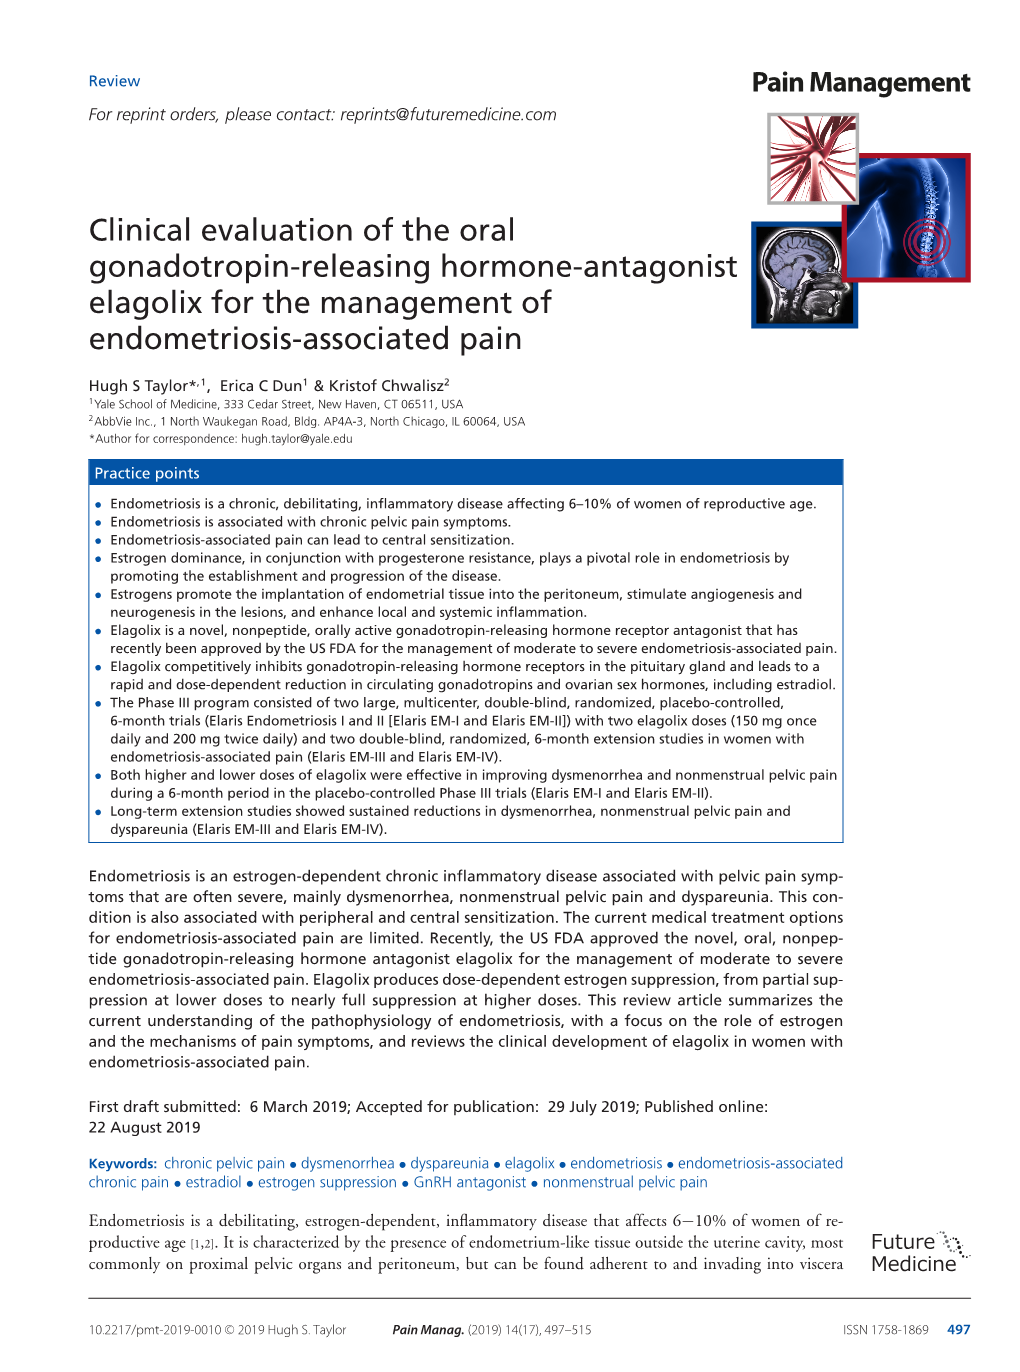 Clinical Evaluation of the Oral Gonadotropin-Releasing Hormone-Antagonist Elagolix for the Management of Endometriosis-Associated Pain